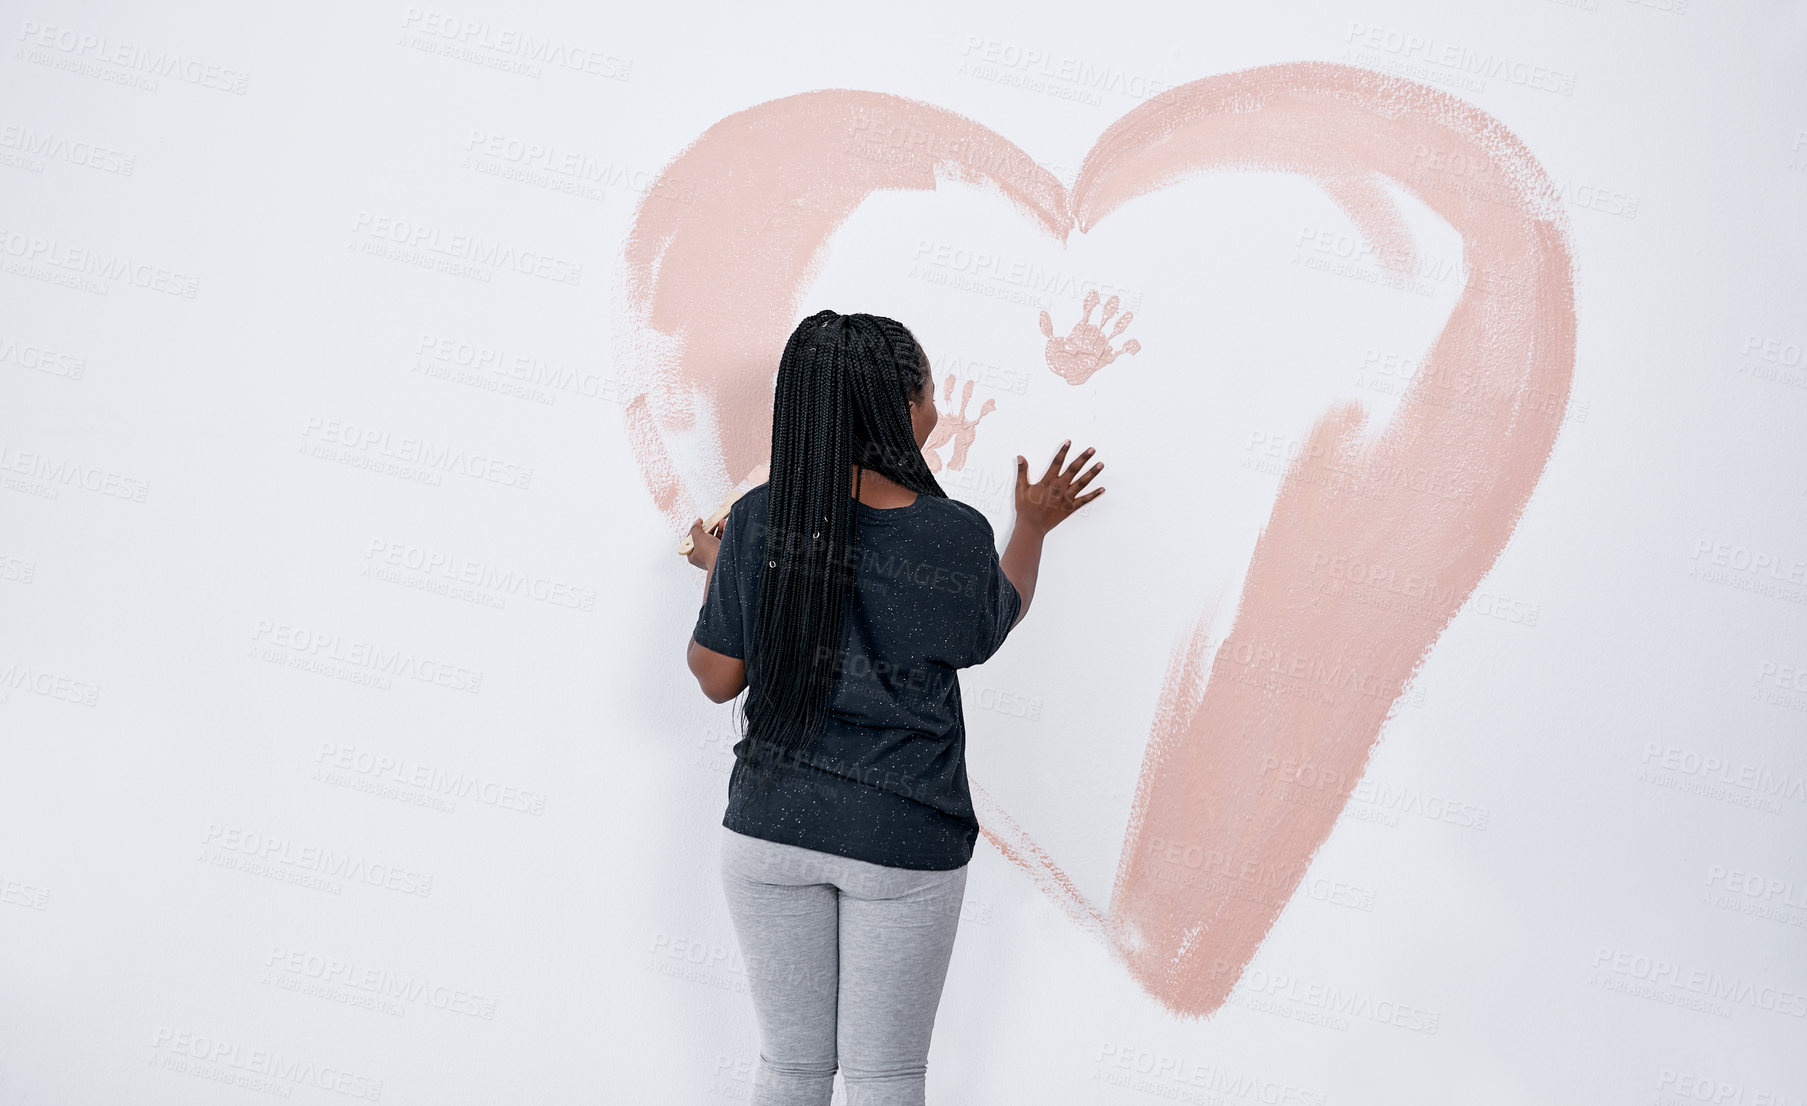 Buy stock photo Shot of a young woman painting a heart on a wall